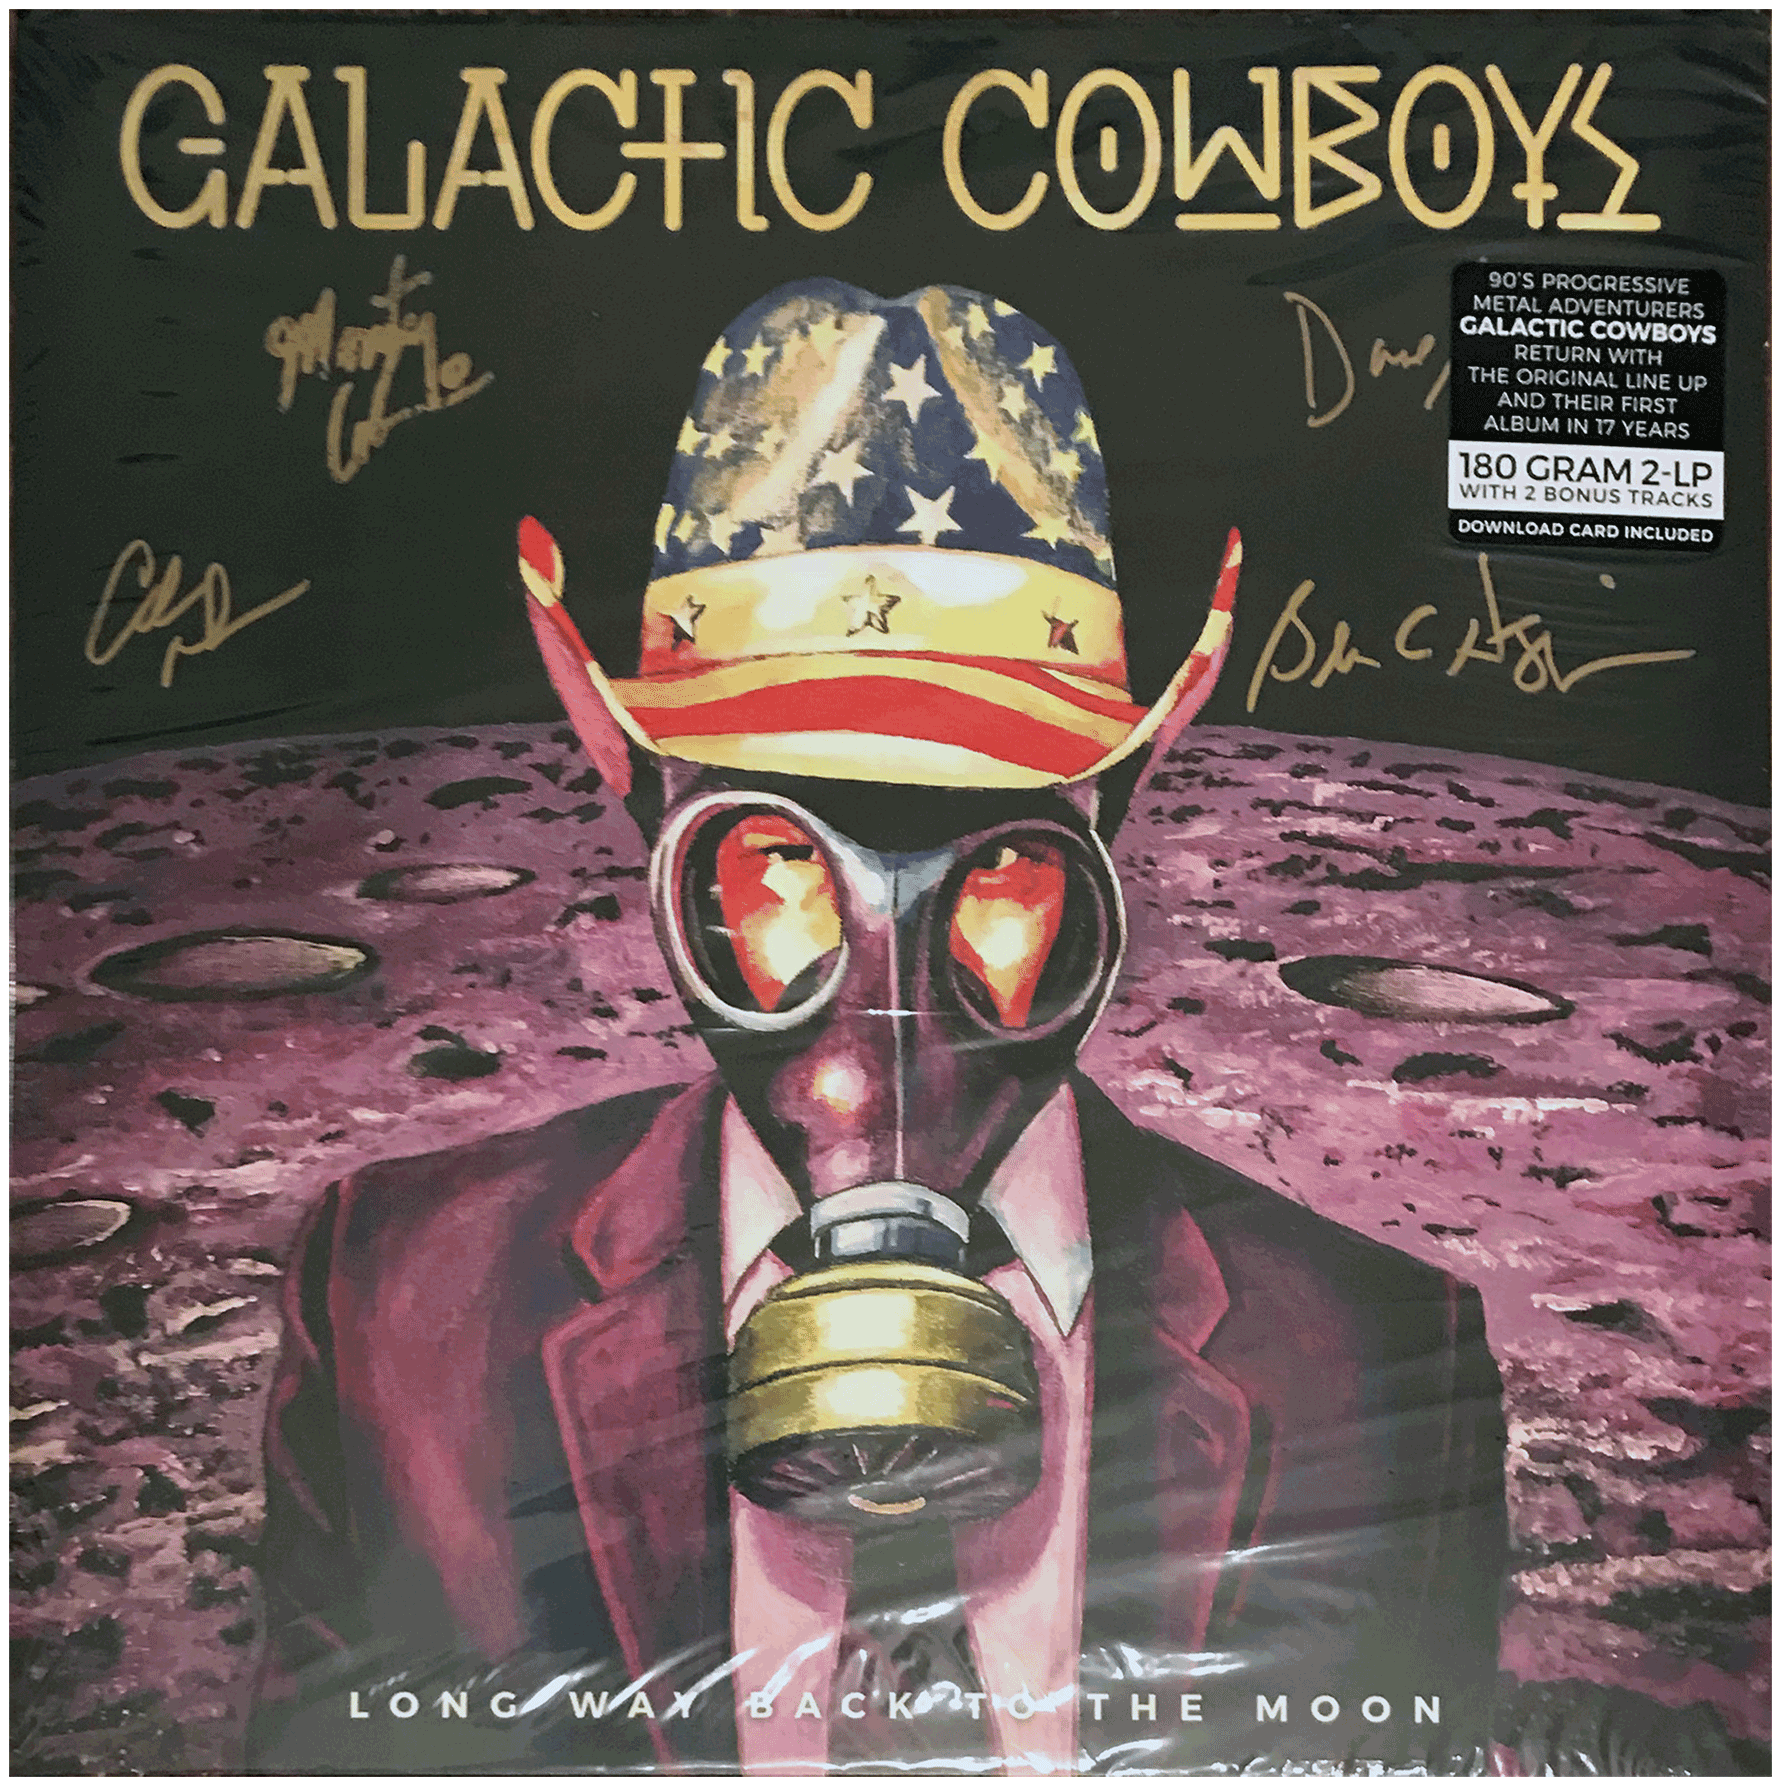 Long Way Back To The Moon - Autographed LP